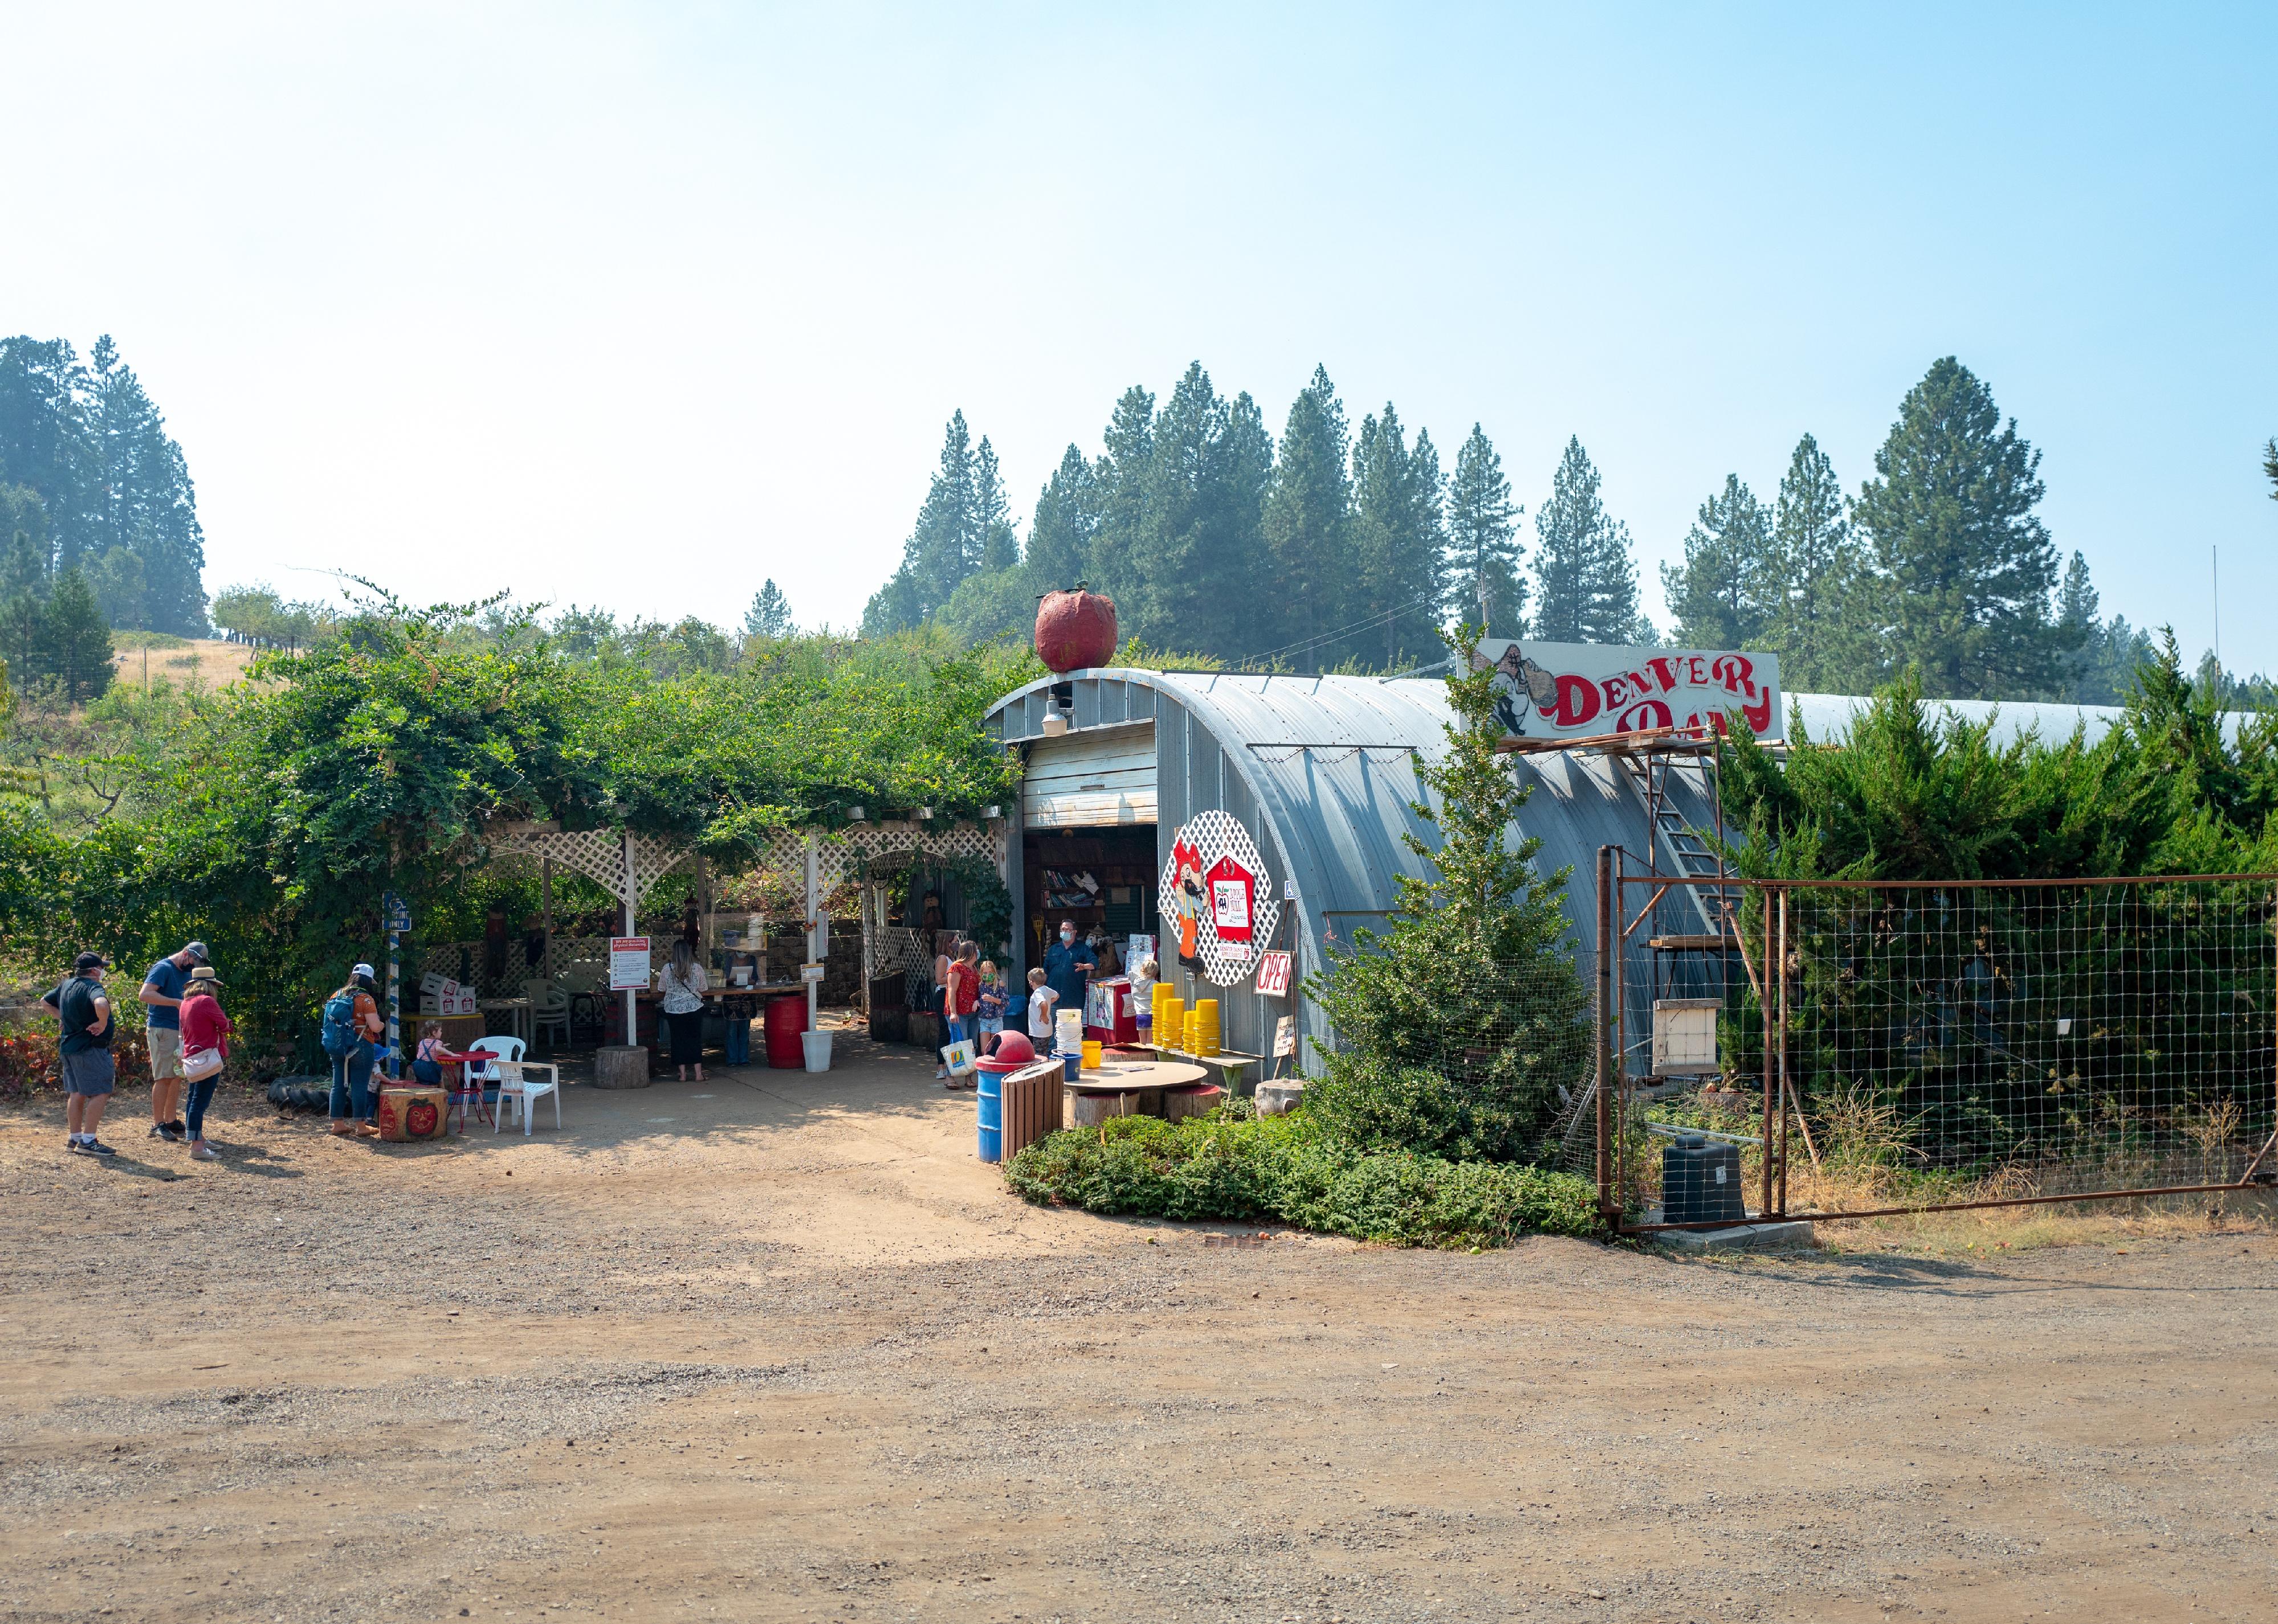 An apple orchard farm store in a metal building with people lined up outside.